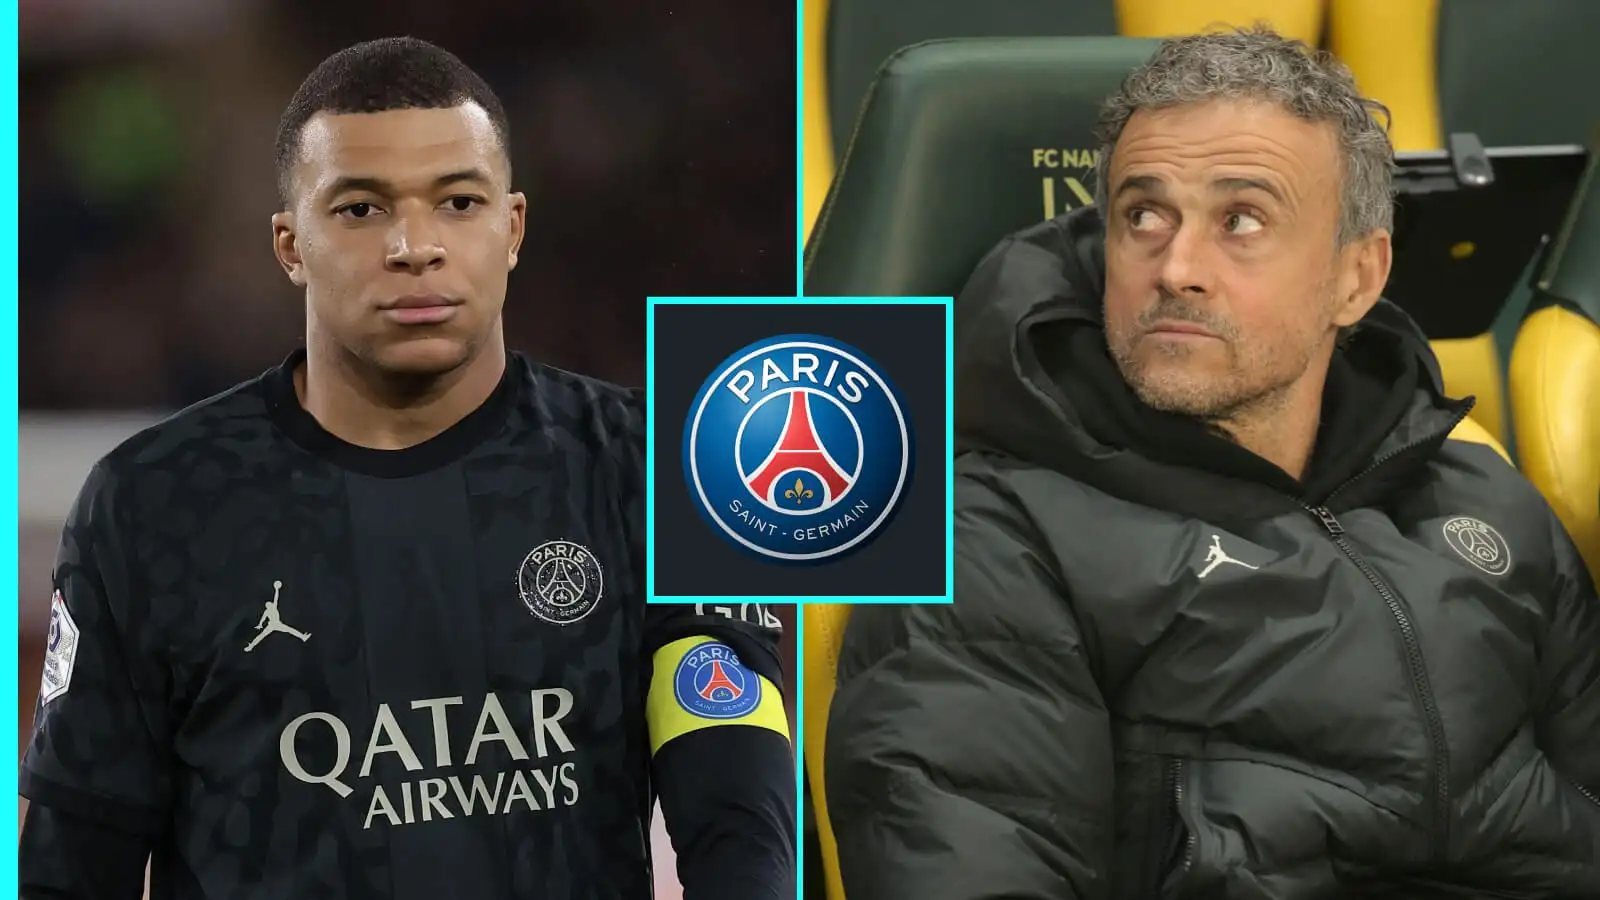 Luis Enrique drops ‘controlling’ Kylian Mbappe claim as Real Madrid prepare for ‘club vs country row’